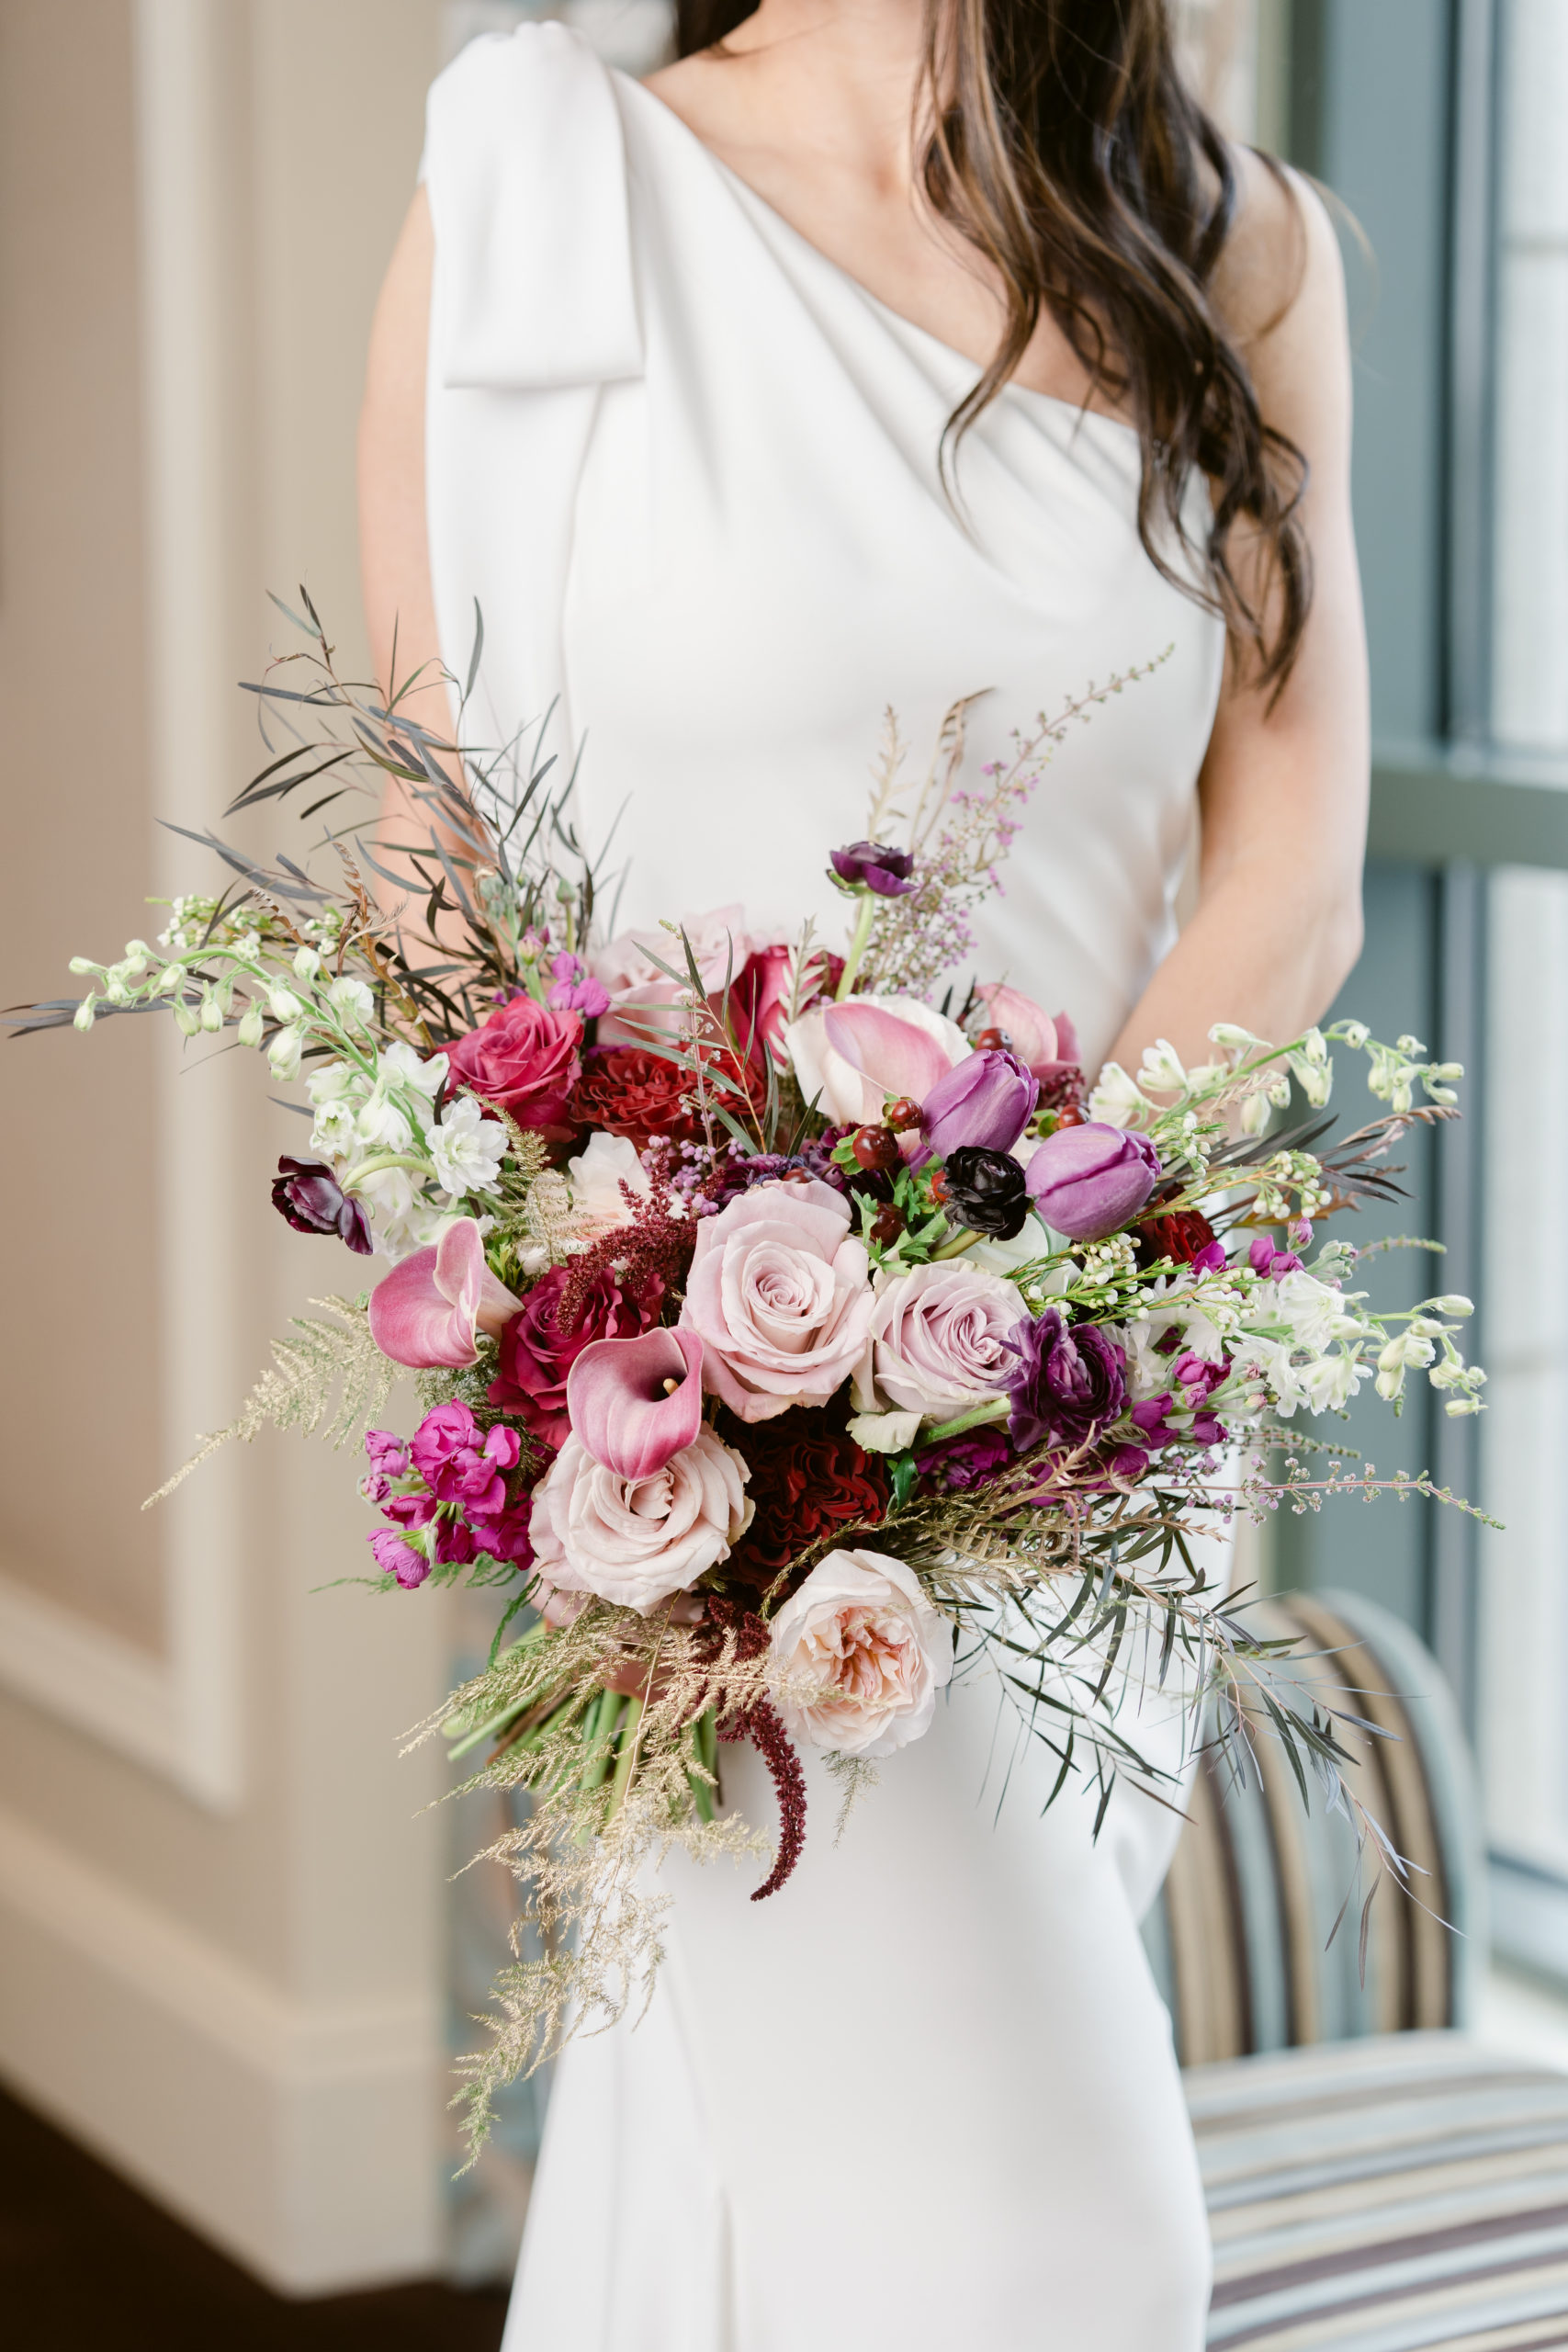 A bride holds her bouquet full of pink, red and purple flowers.